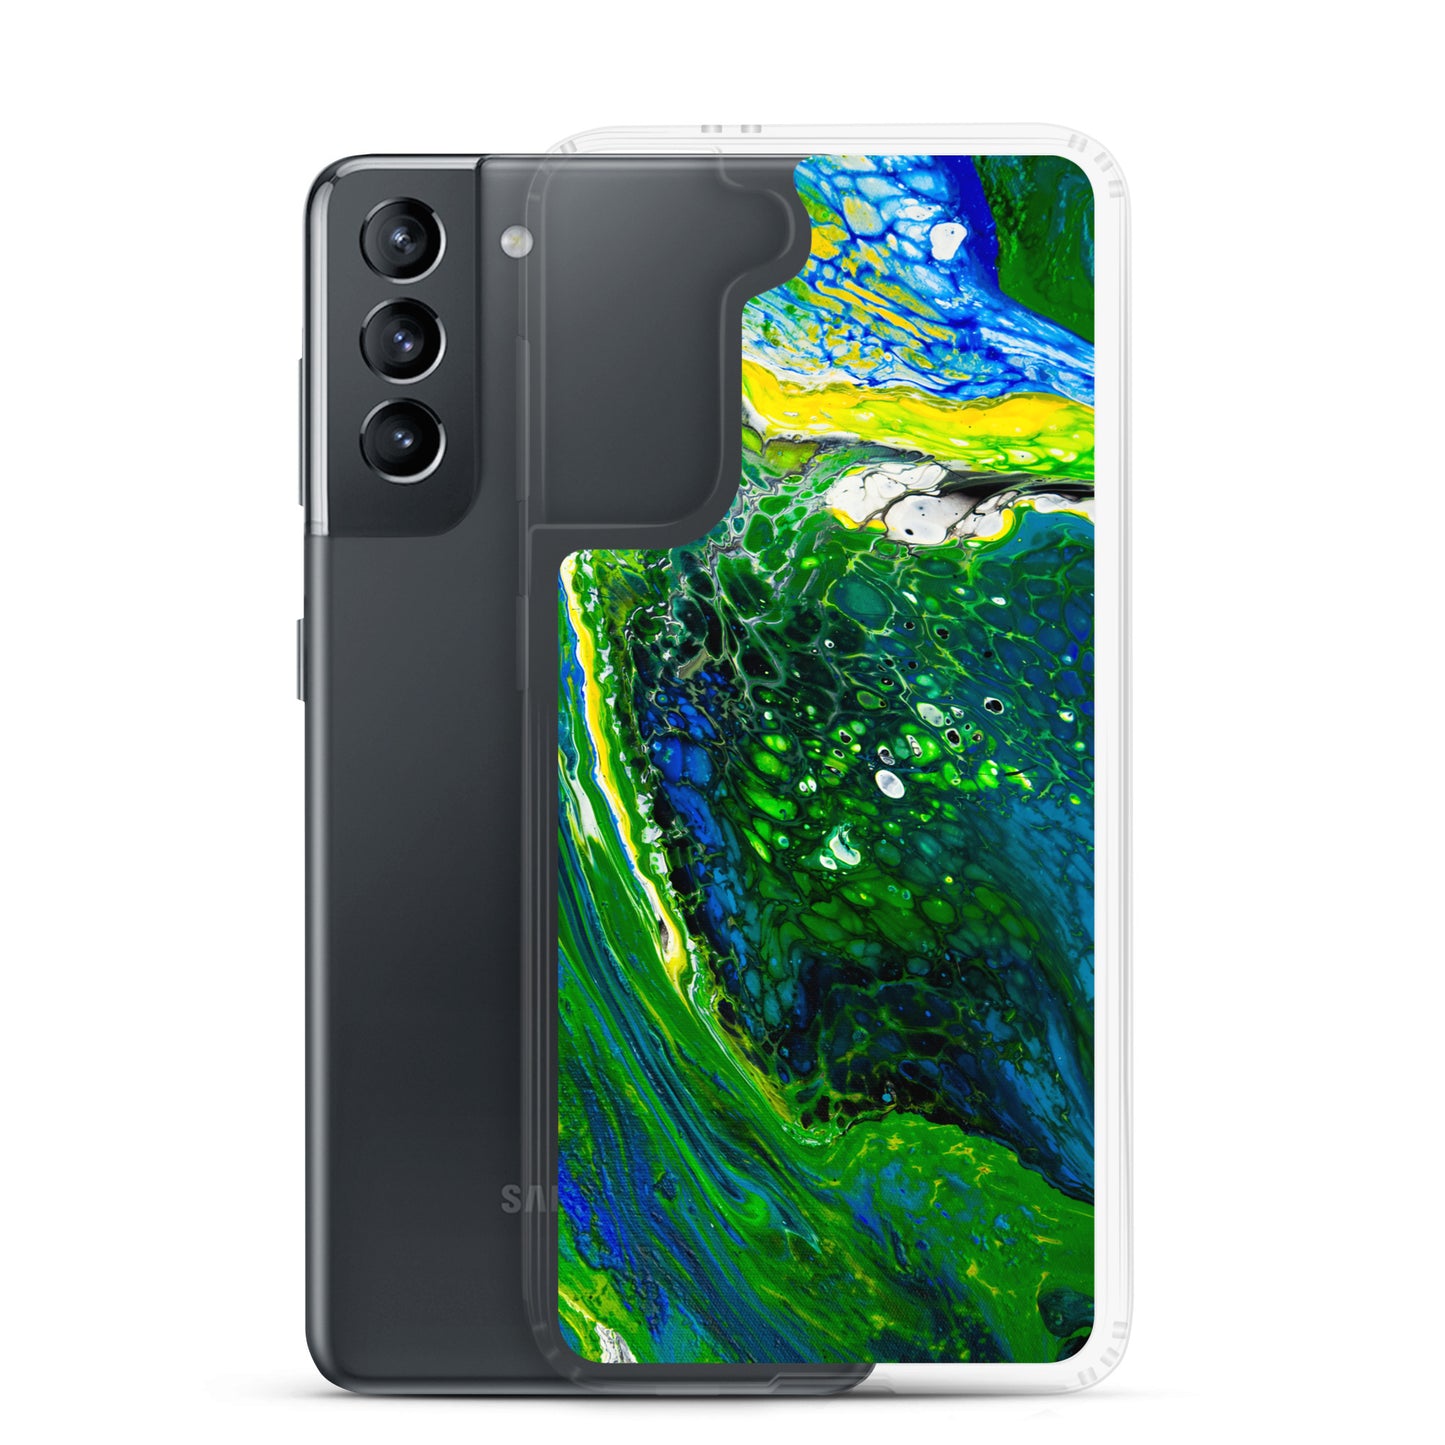 NightOwl Studio Custom Phone Case Compatible with Samsung Galaxy, Slim Cover for Wireless Charging, Drop and Scratch Resistant, Green Stream